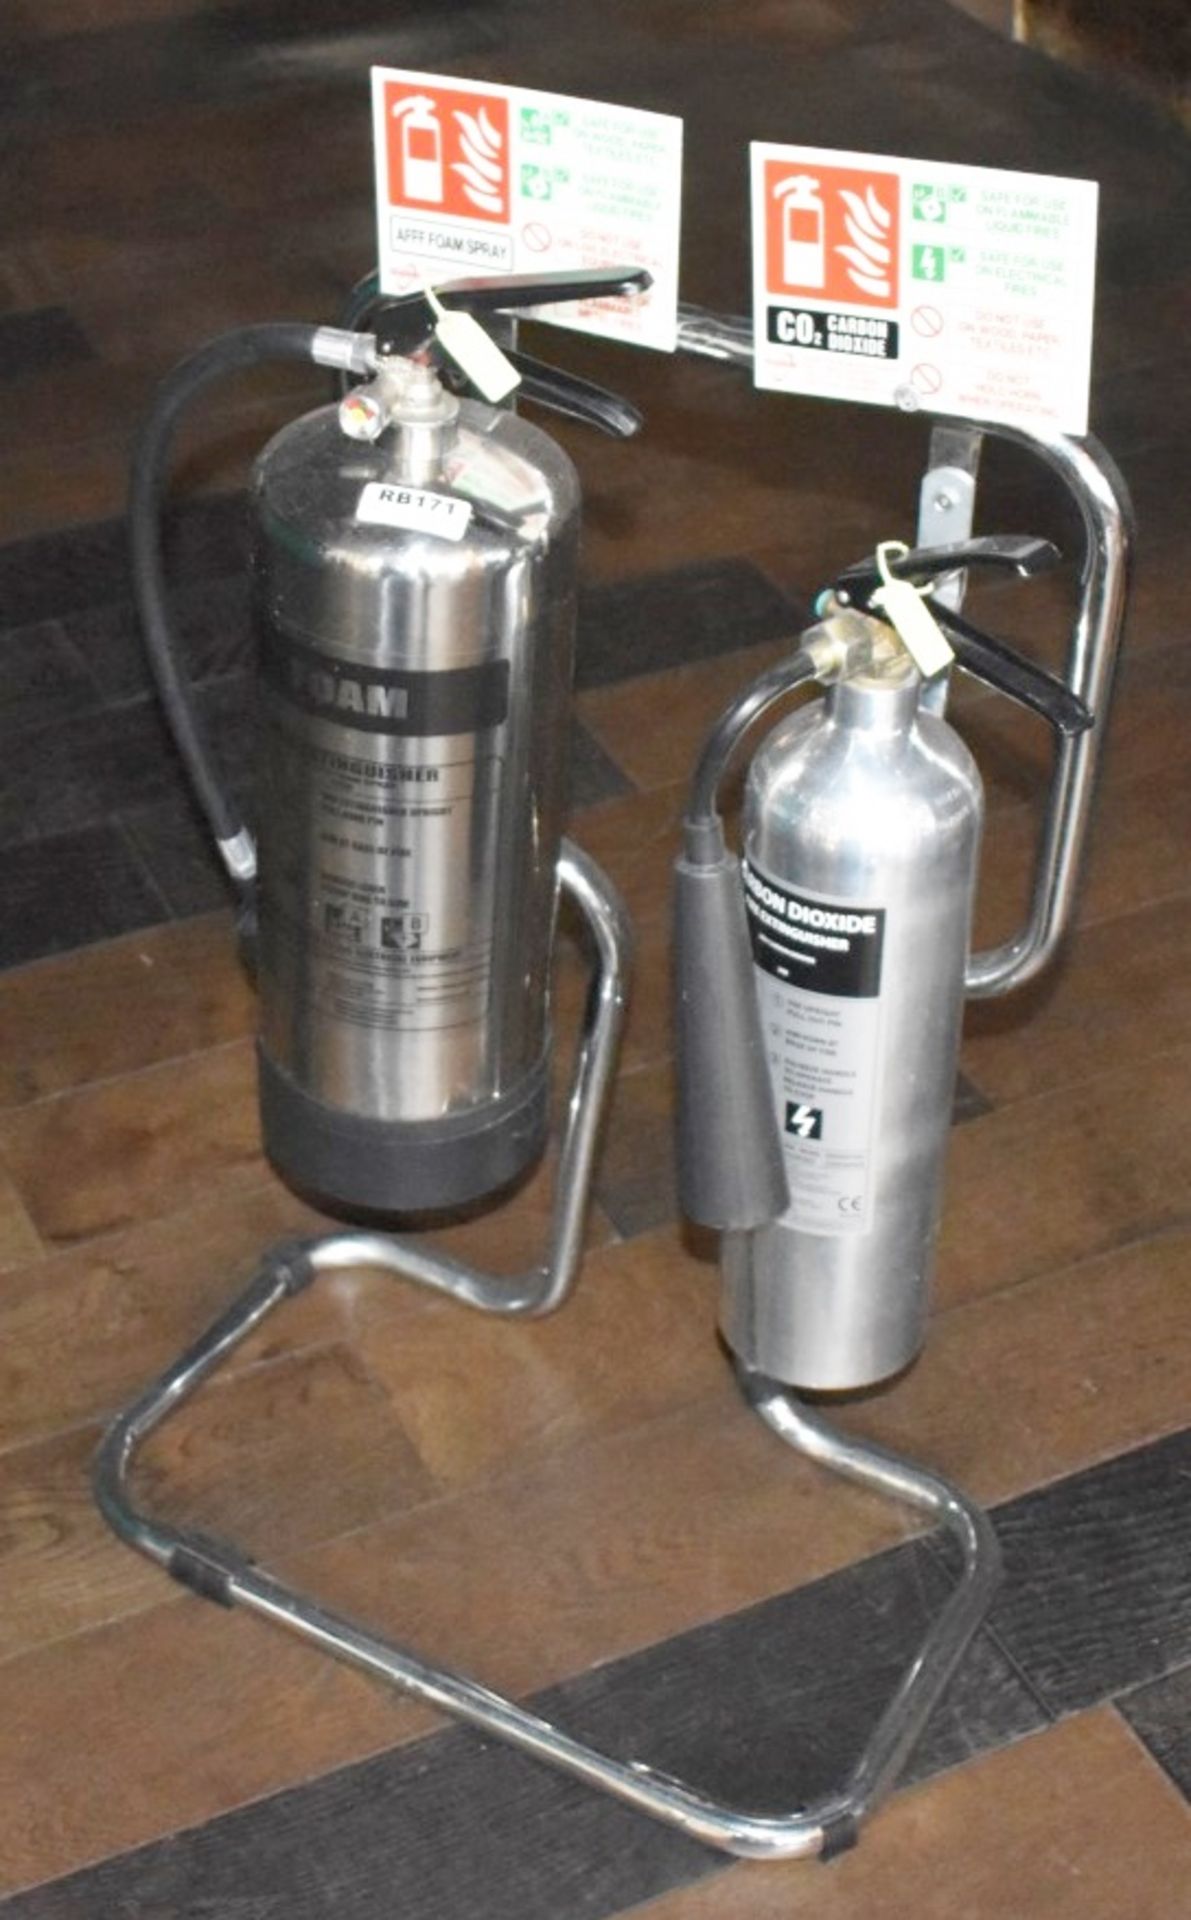 2 x Fire Extinguishers in Chrome With Stand - Foam & Carbon Dioxide - Ref: RB171 - CL558 - Location: